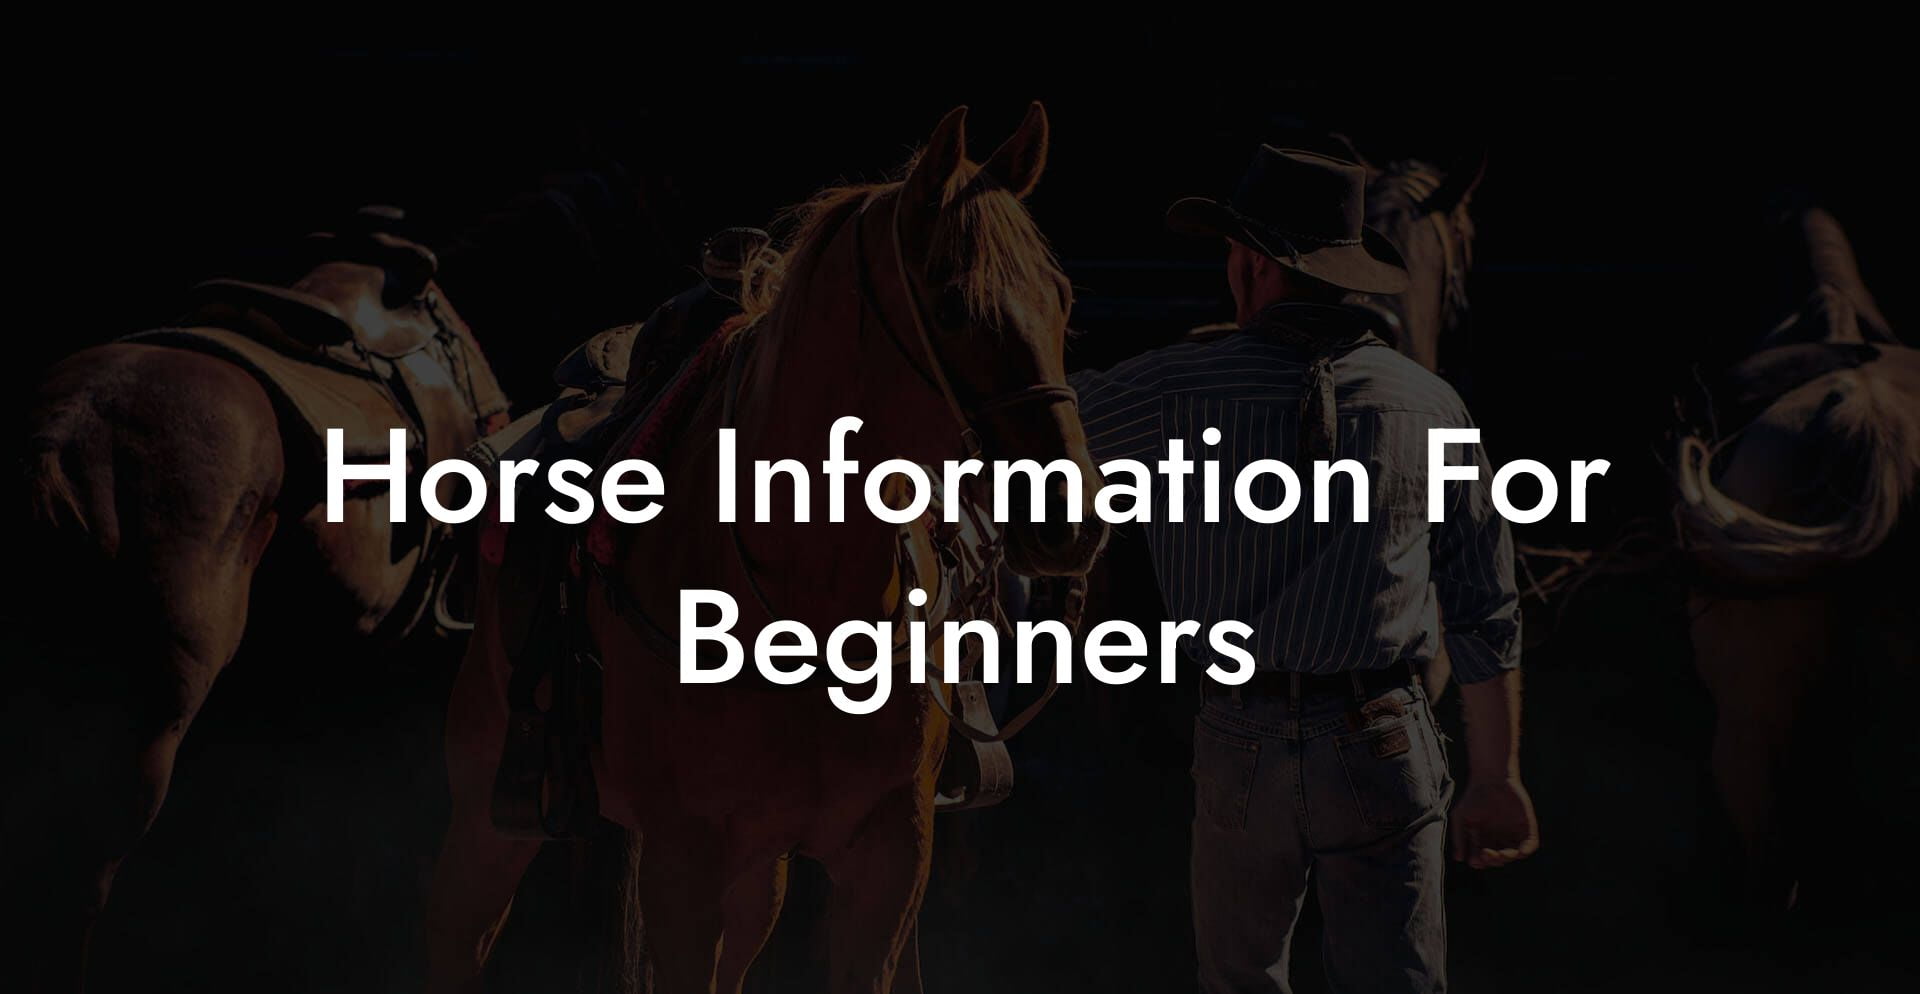 Horse Information For Beginners